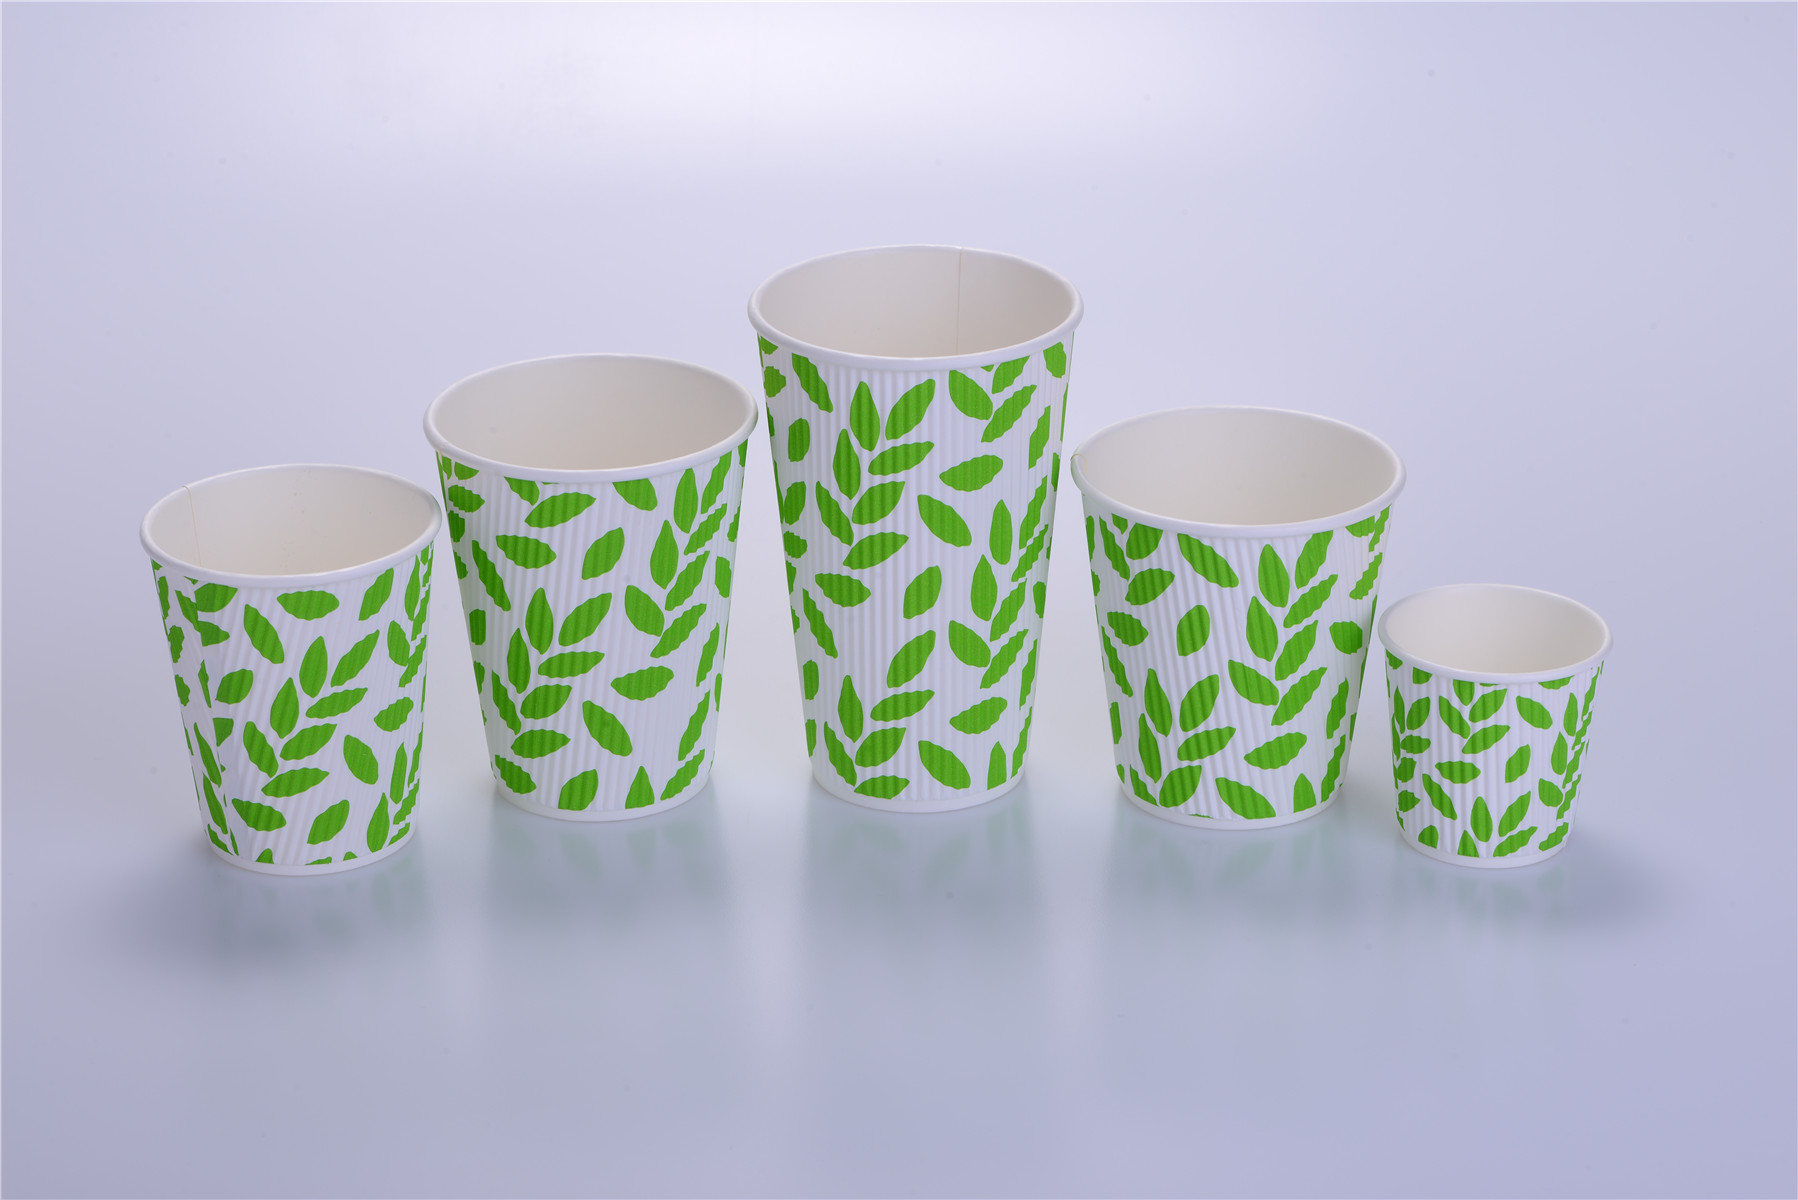 compostable cups manufacture